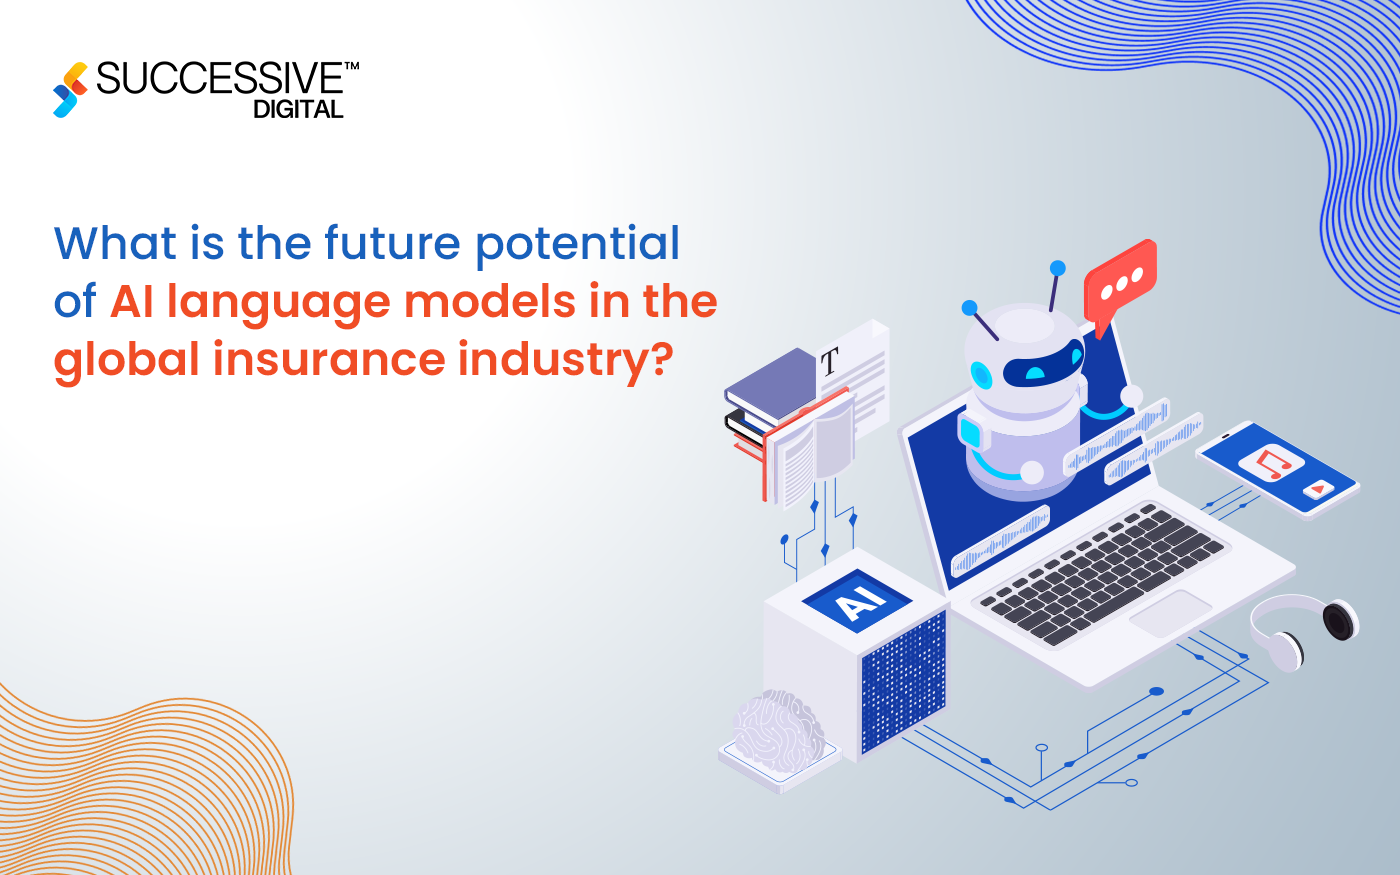 What is the future potential of AI language models in the global insurance industry?